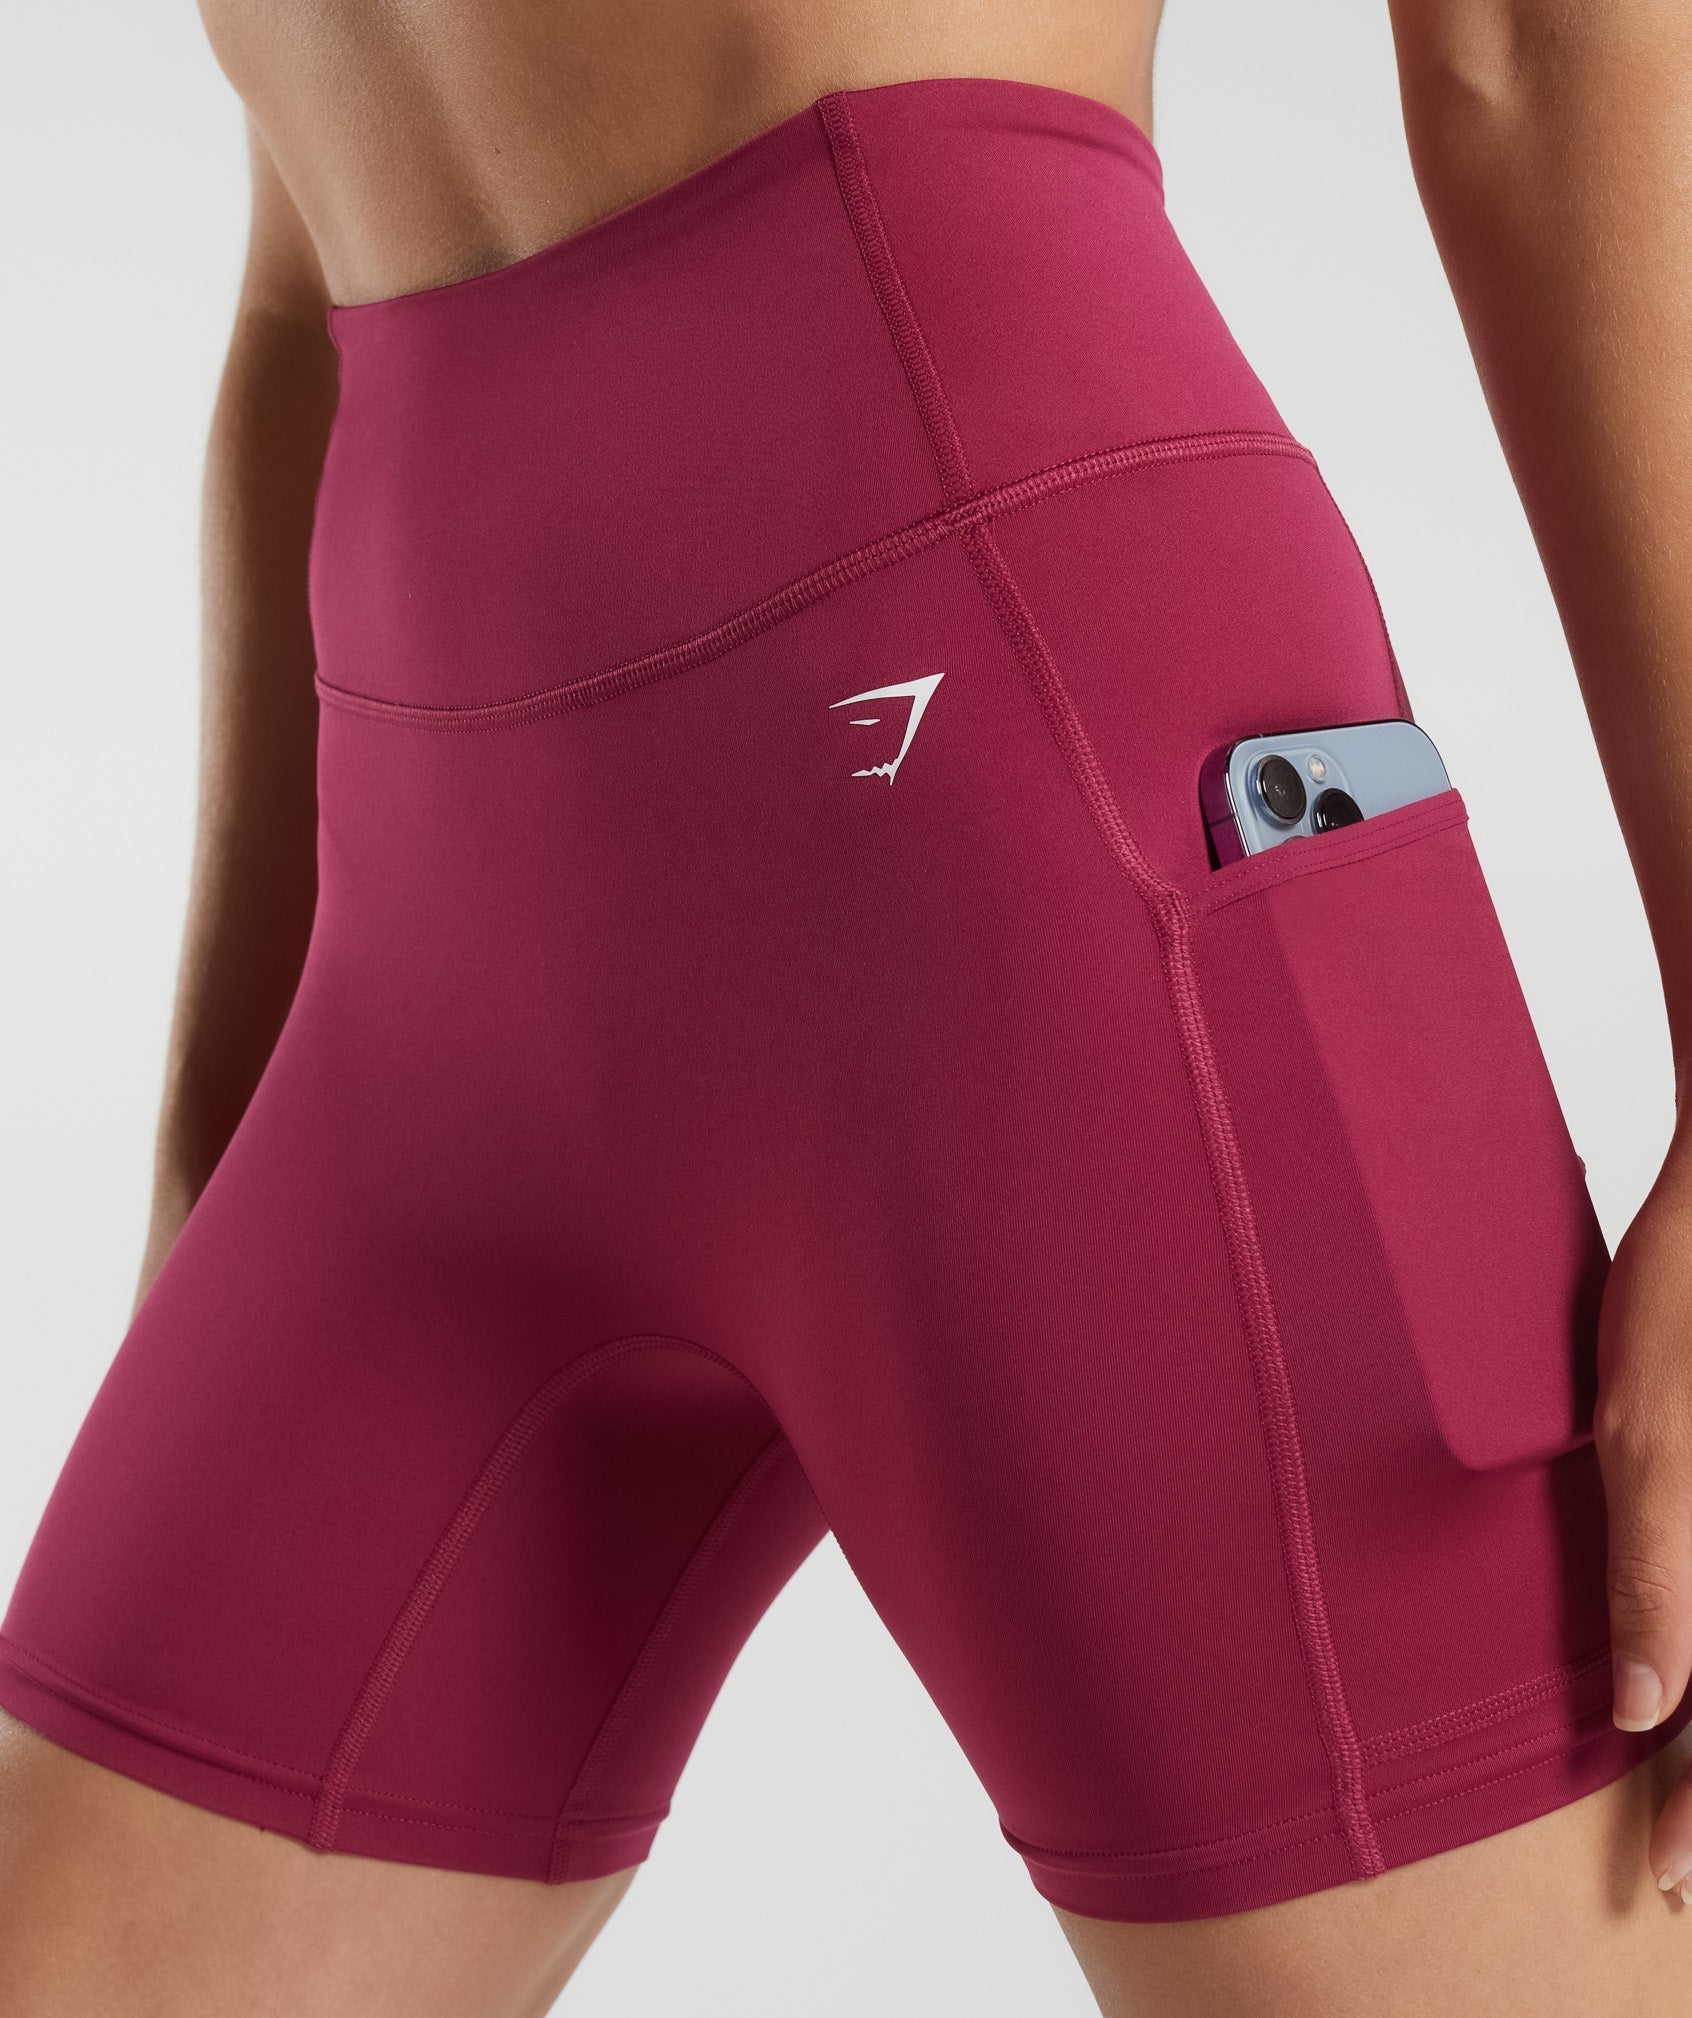 Pocket Shorts in Raspberry Pink - view 5